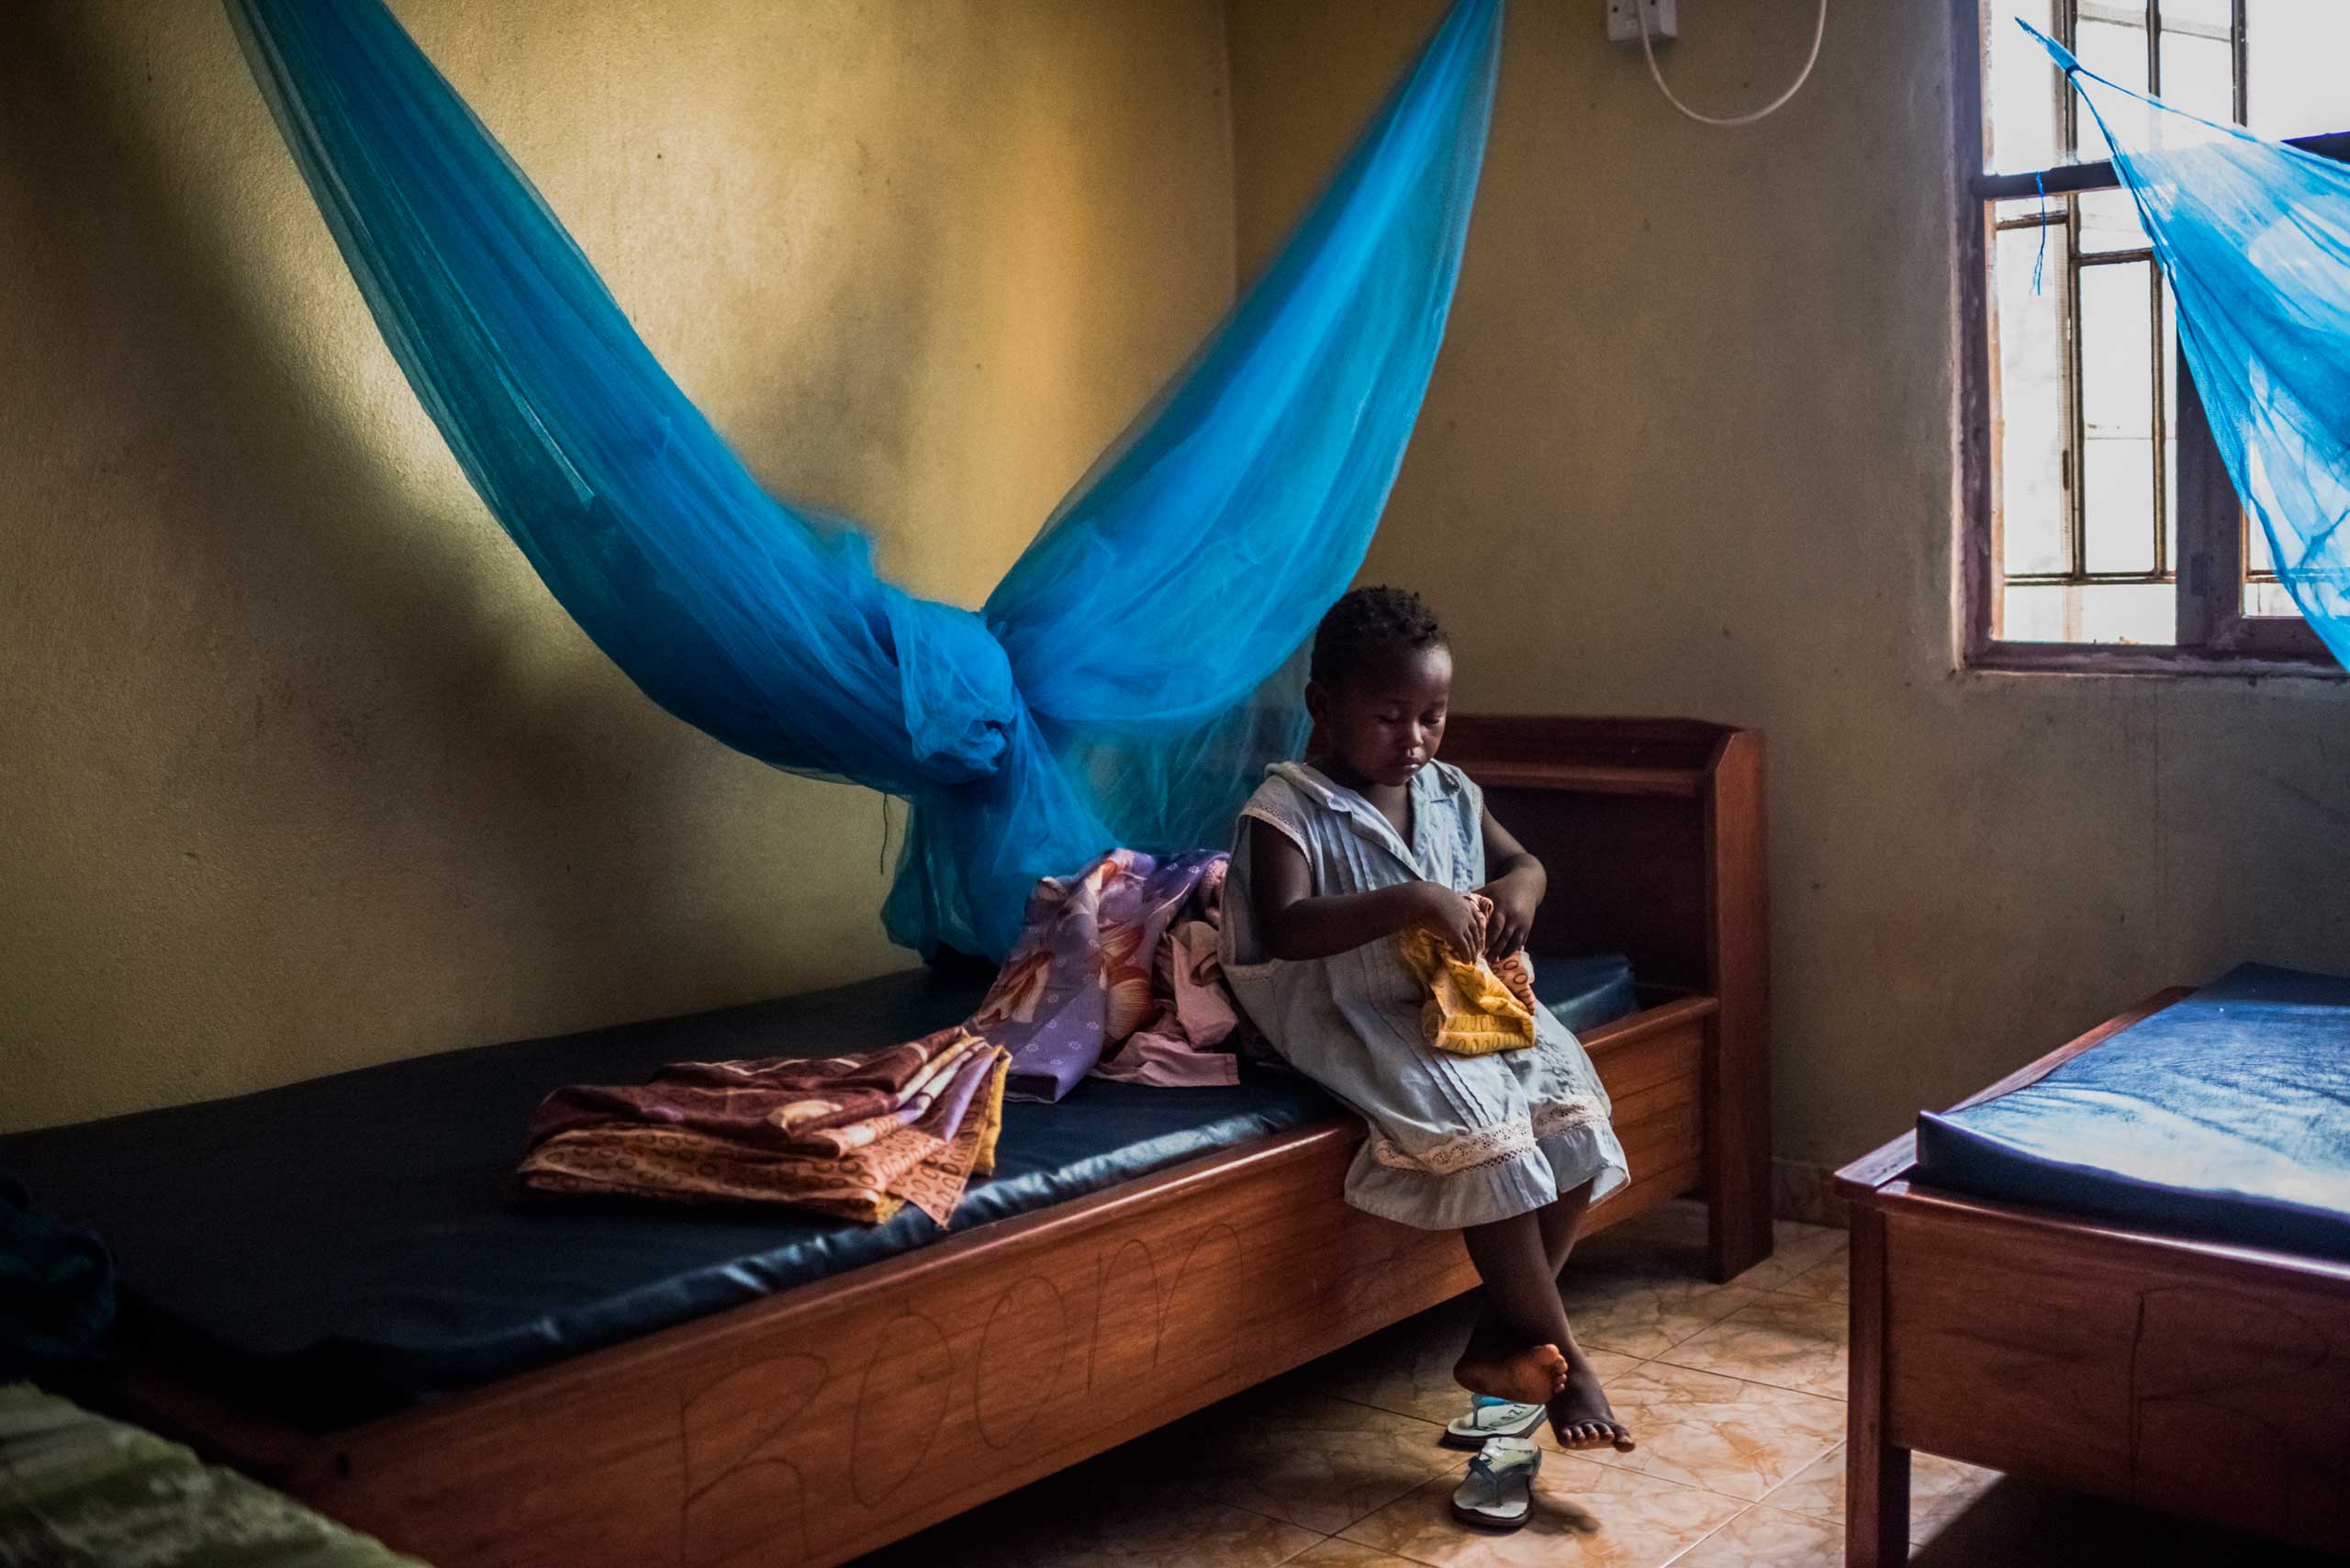 Sweetie Sweetie, believed to be 4, who was orphaned by Ebola, sits in her bedroom at the group home where she now lives in Port Loko, Sierra Leone, Dec. 6, 2014. Ebola has been wretched for children, but the worst off, by far, are the orphans, many of whom are stigmatized and shunned by their own communities.